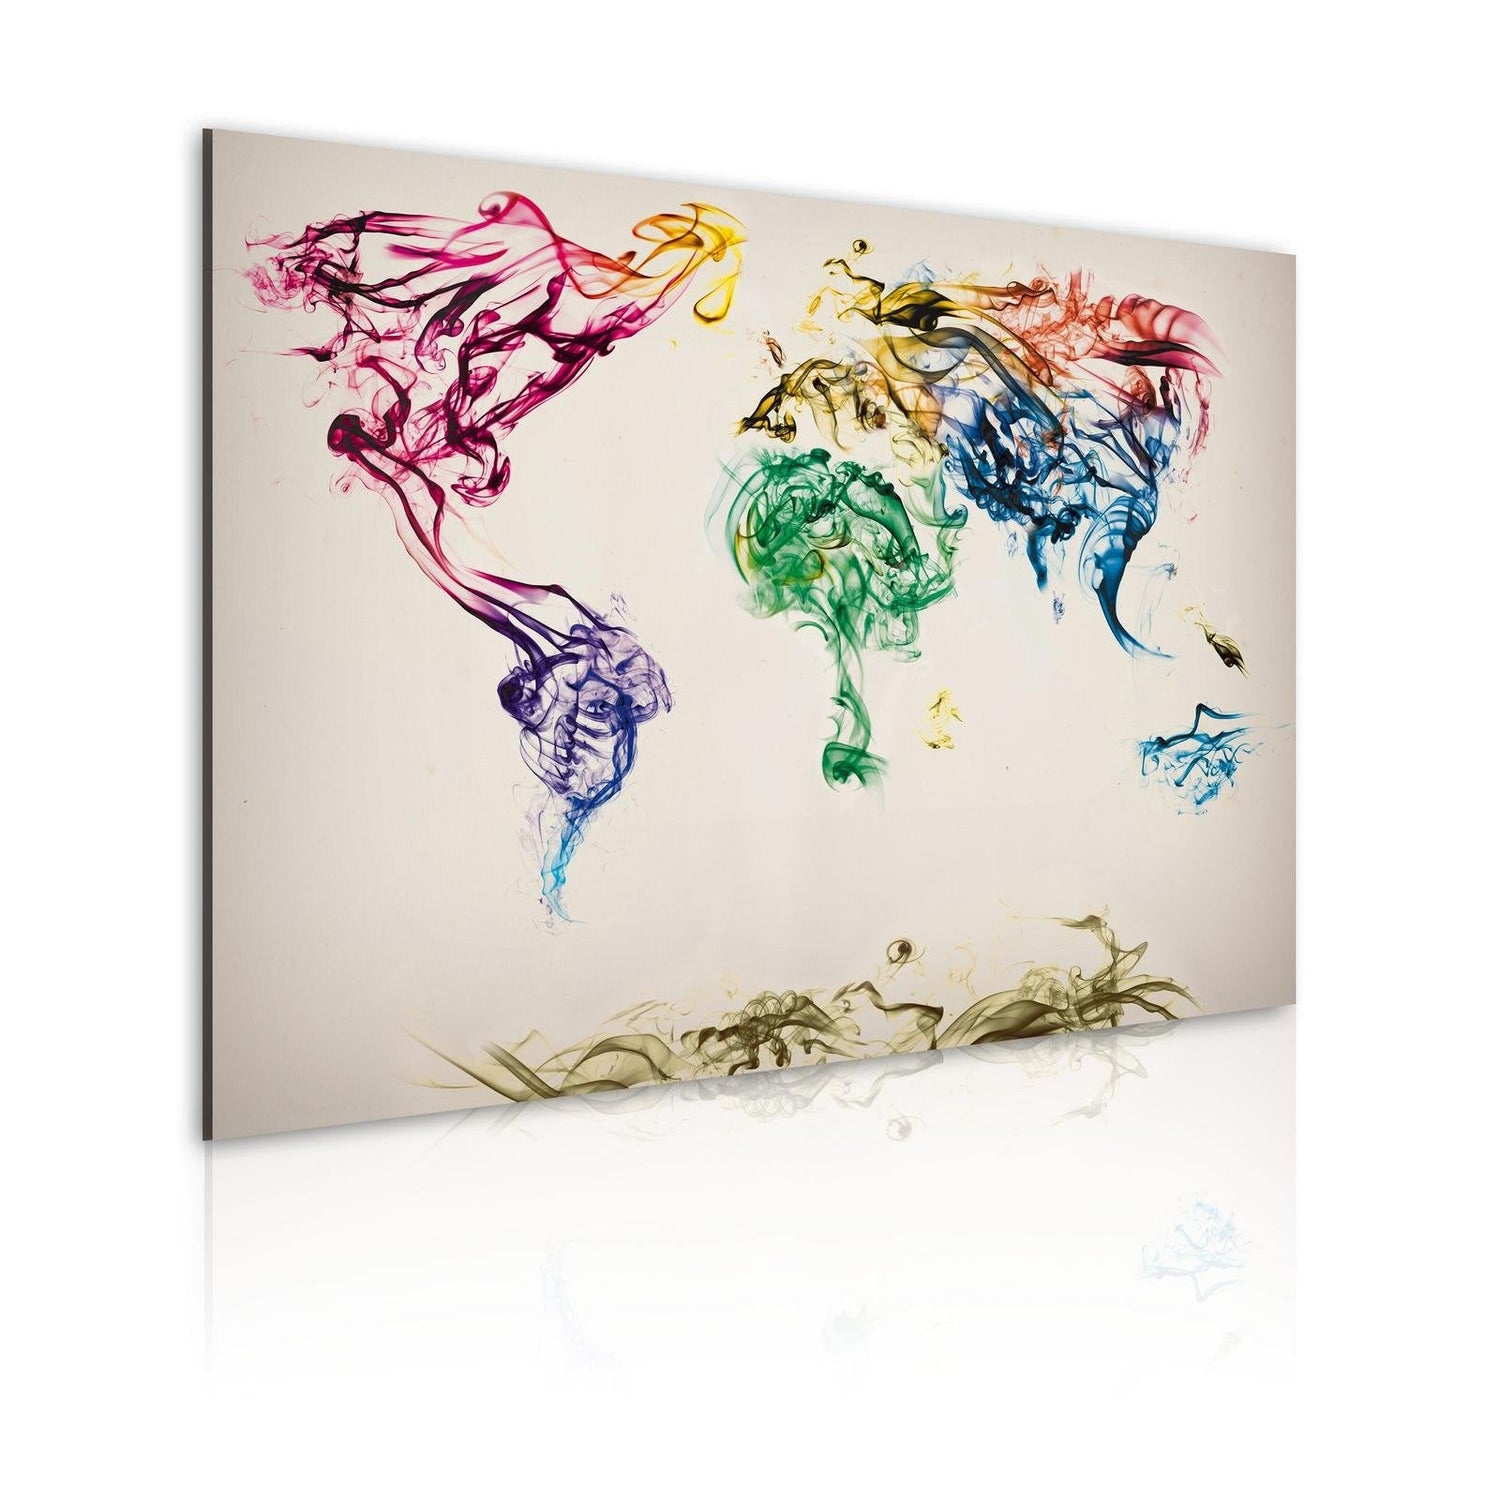 Stretched Canvas World Map Art - The World Map - Colored Smoke Trails-Tiptophomedecor